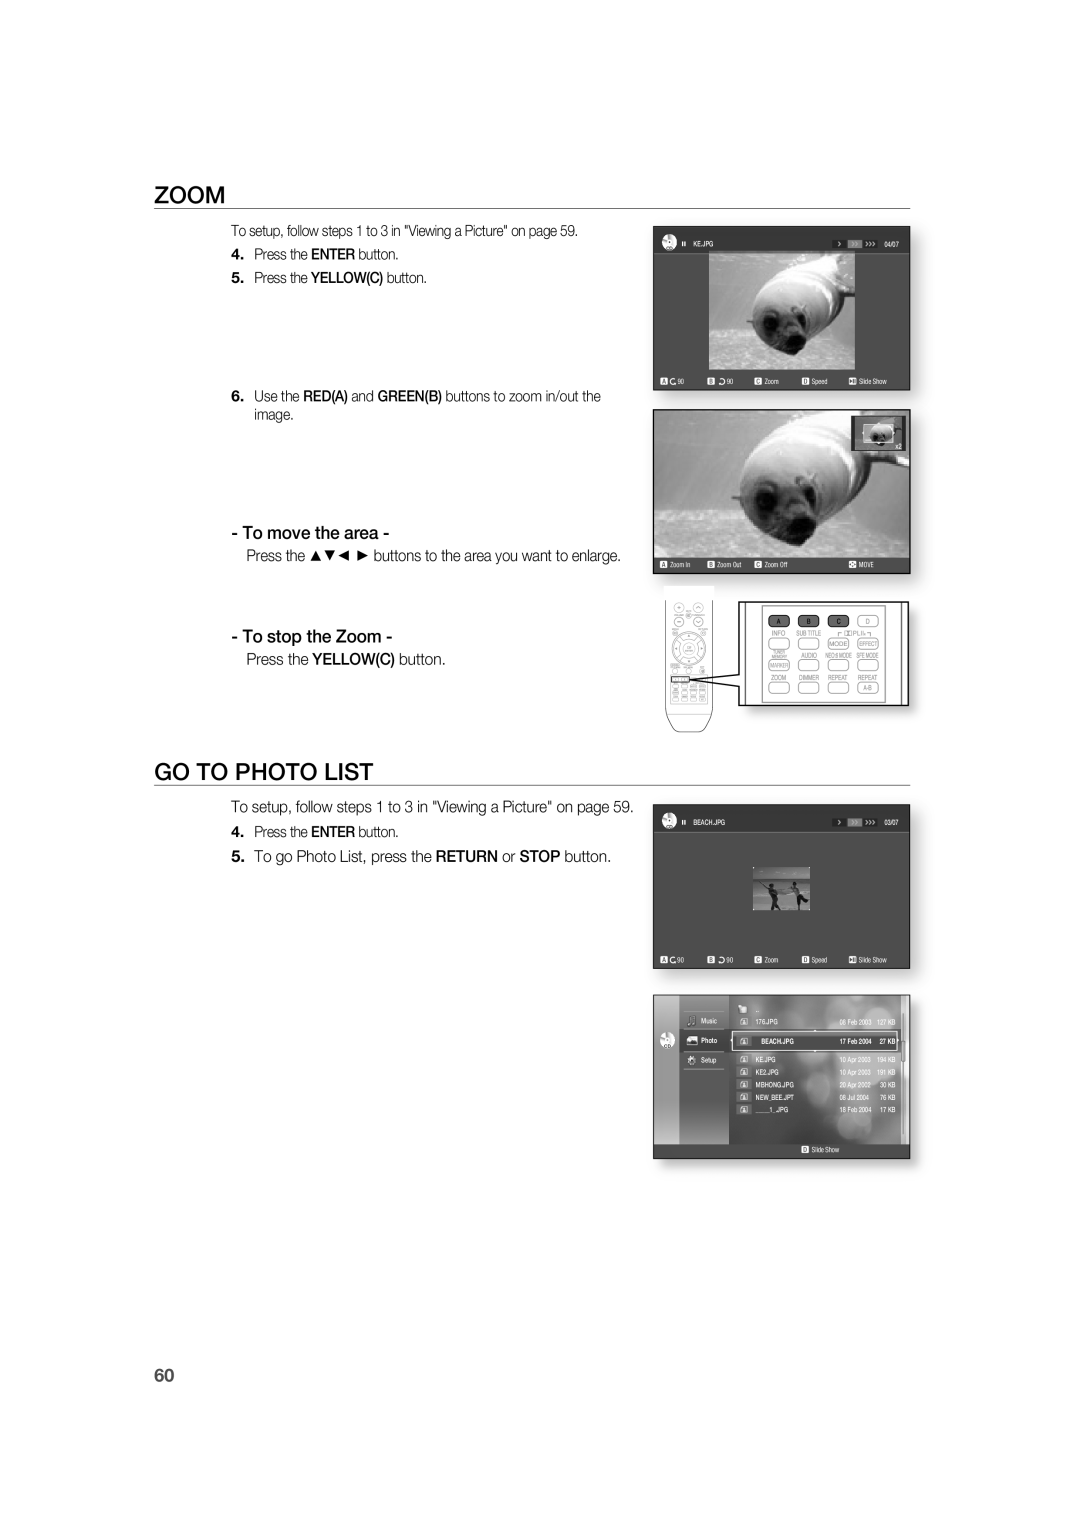 Samsung AH68-02019K manual Go To Photo List, To move the area, To stop the Zoom 